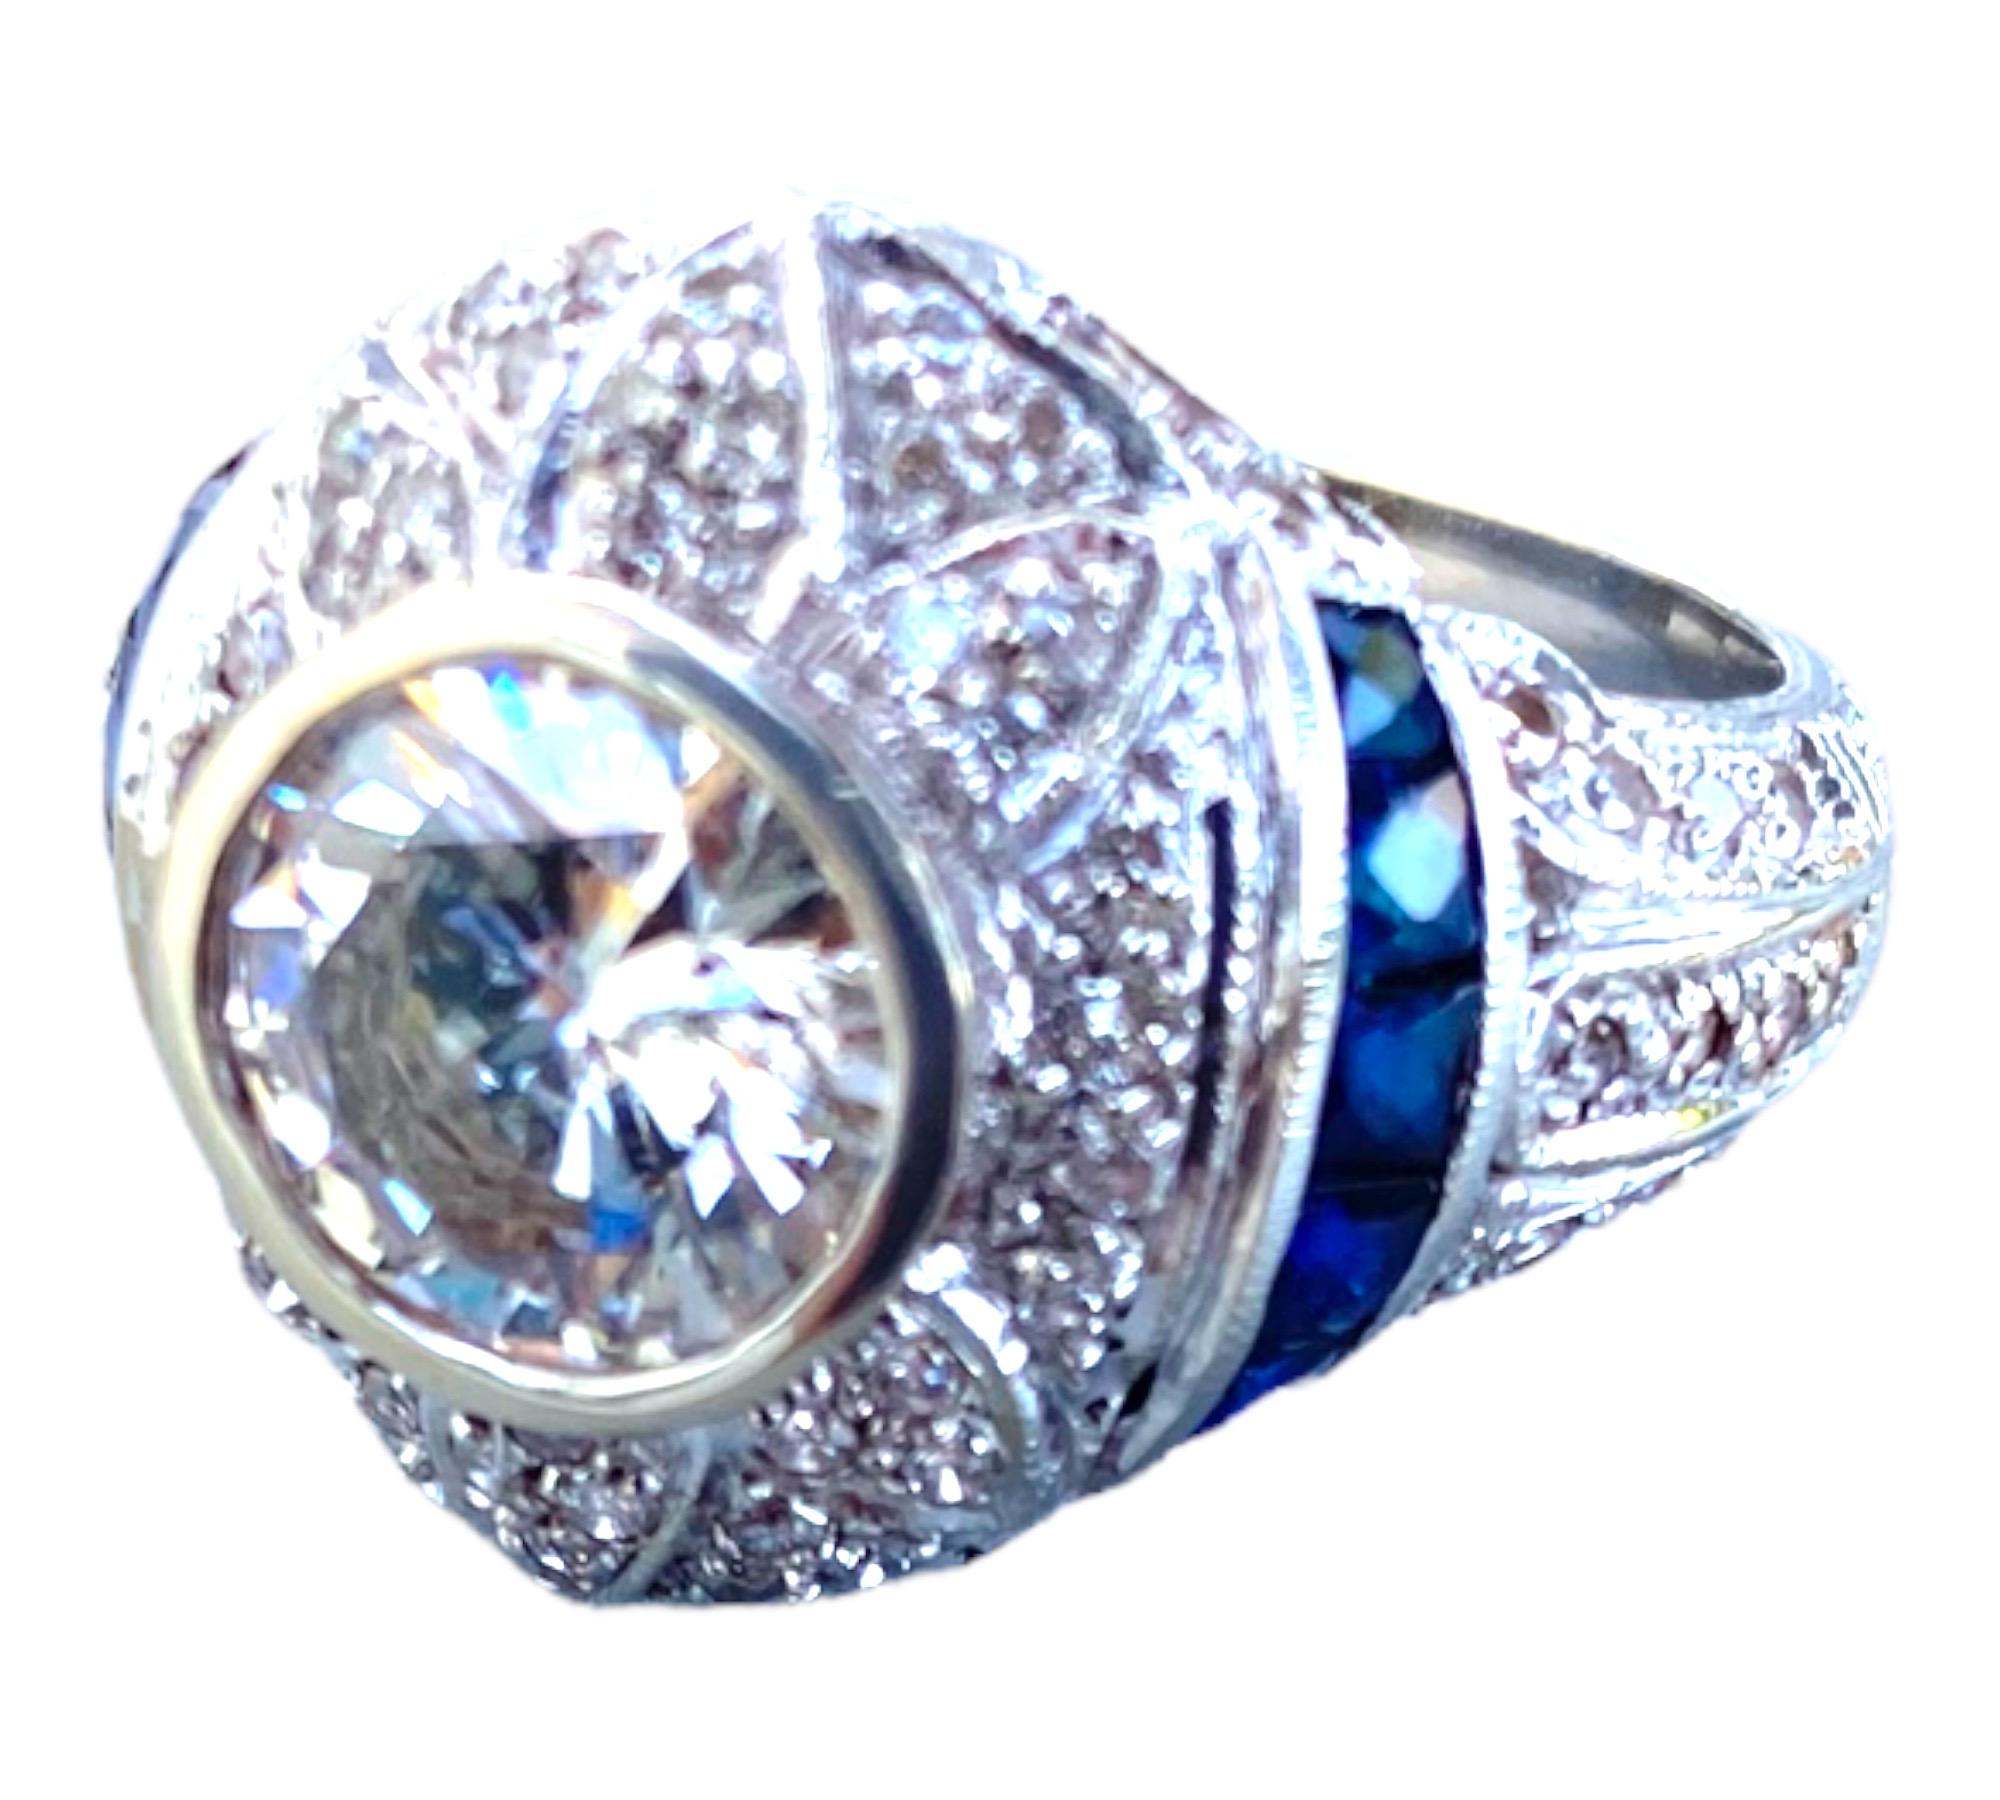 Edwardian Diamond and Sapphire Ring 18 Karat White Gold

Circa's late 1800s-style ring consists of a round center diamond set in a 15.77 mm dome-shaped ring with blue sapphires. The eight sapphires are french cut, princess shaped, and placed on